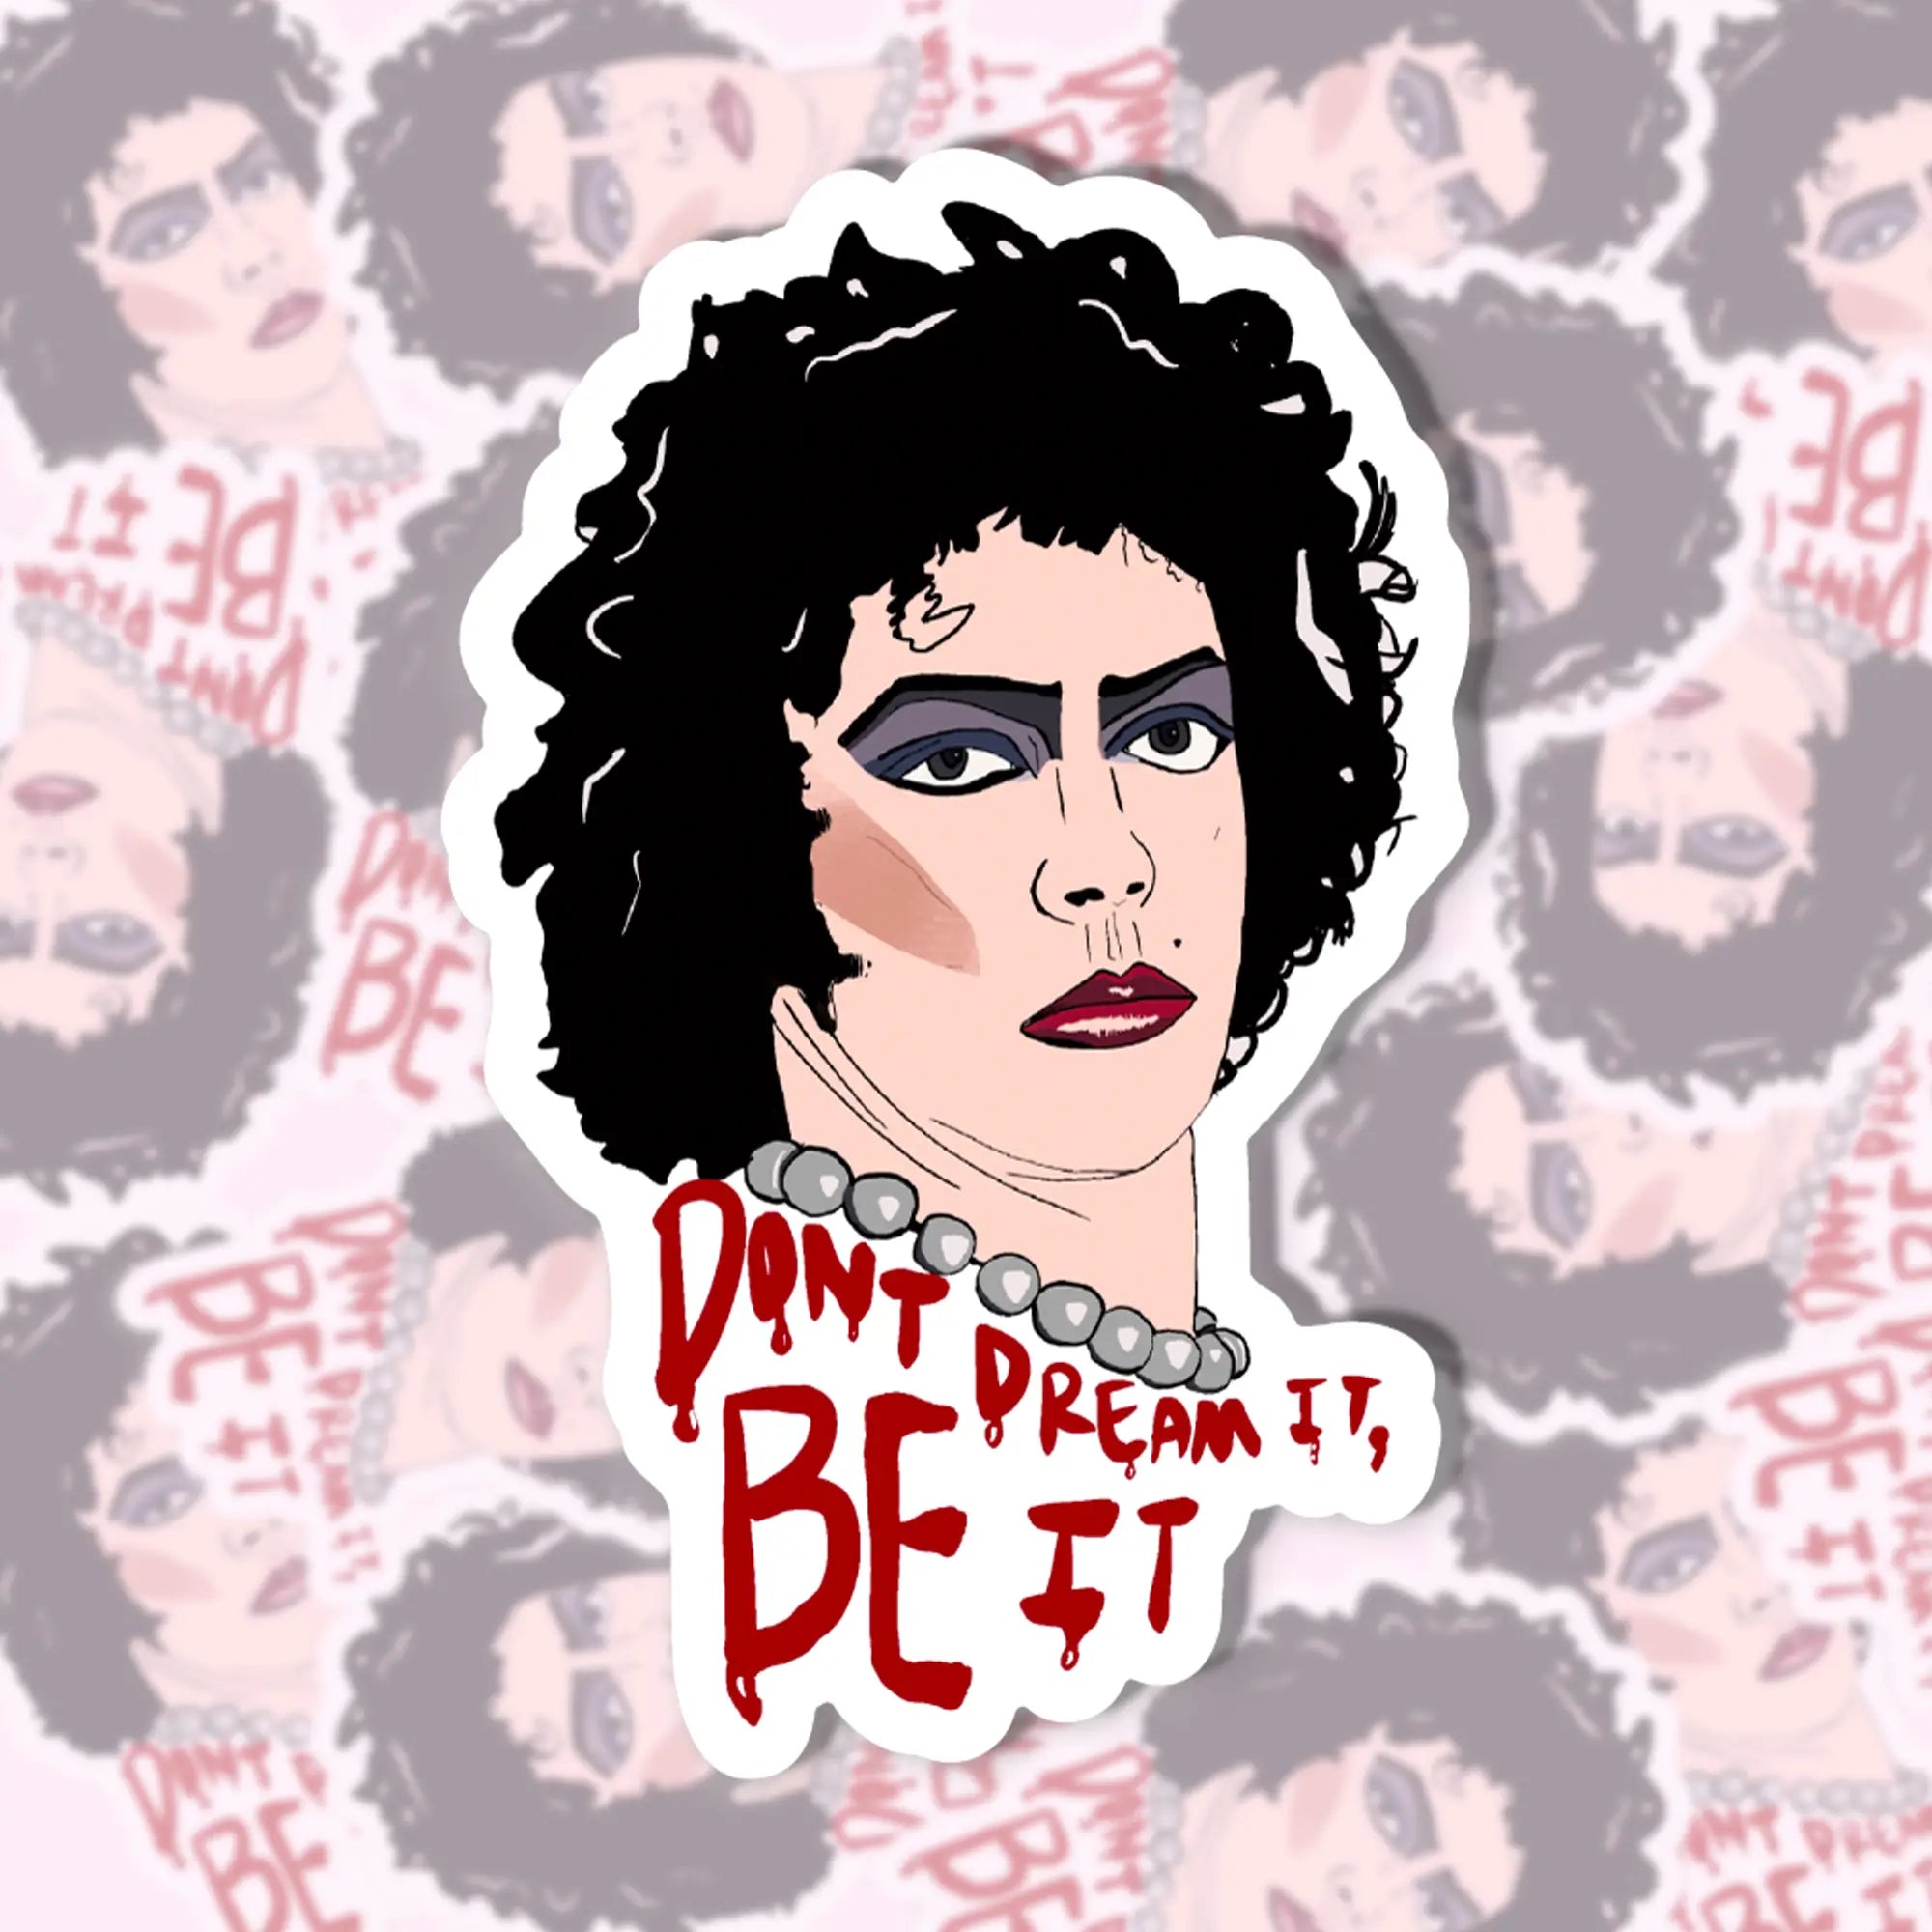 A die cut sticker of Tim Curry as Dr. Frankenfurter from the Rocky Horror Picture show with the words “Don’t dream it, be if” written in red drippy font below